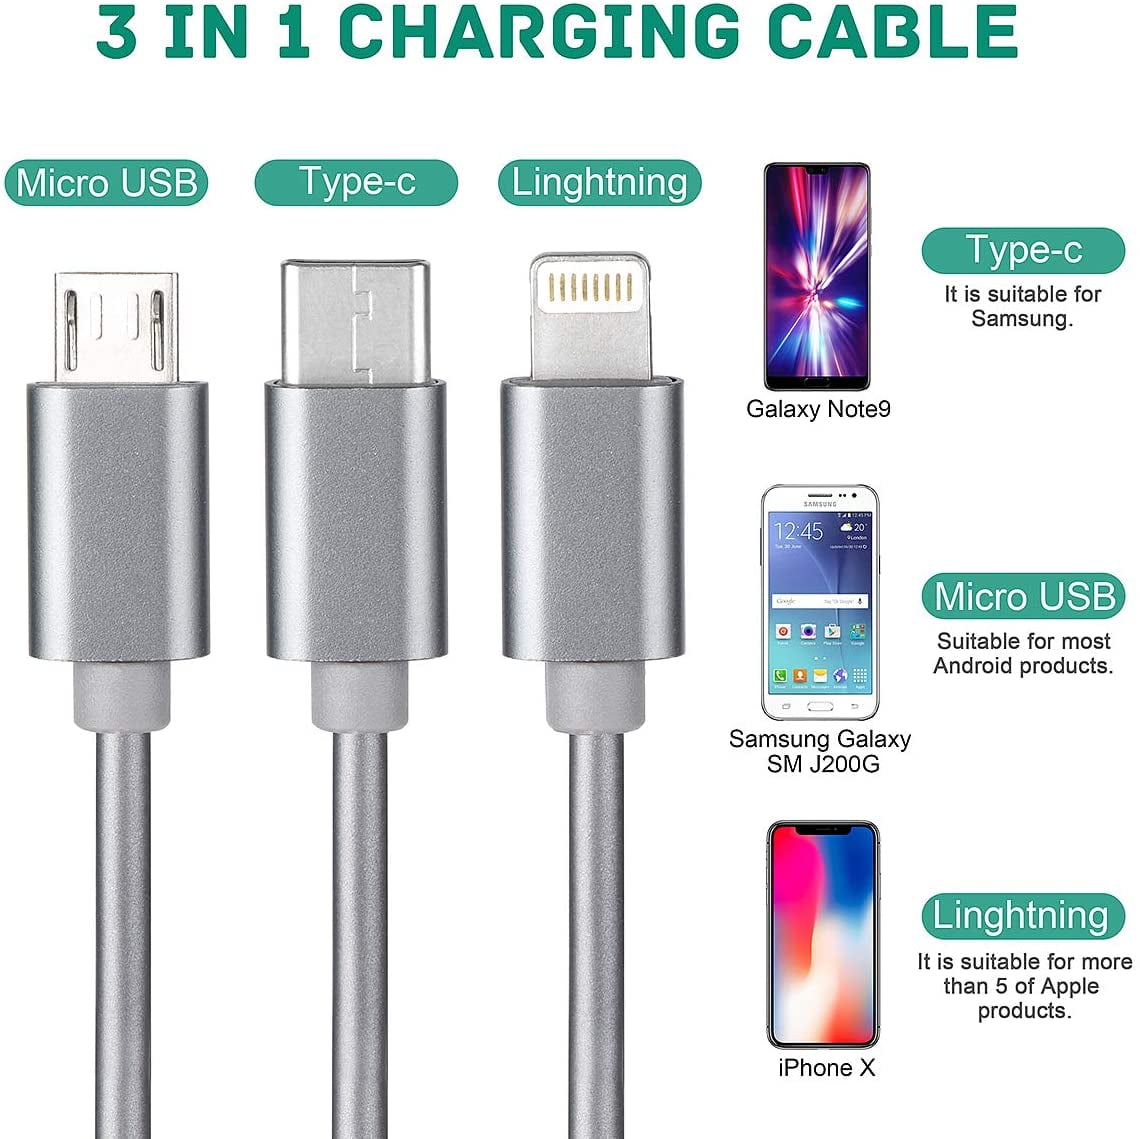 Multi Fast Charger Cord Adapter USB Port Connectors Compatible with iPhone,Android Phone,Samsung,Ipad,Laptop Gray Maroon and White Tile Quick Charging Cable Retractable USB C Cable